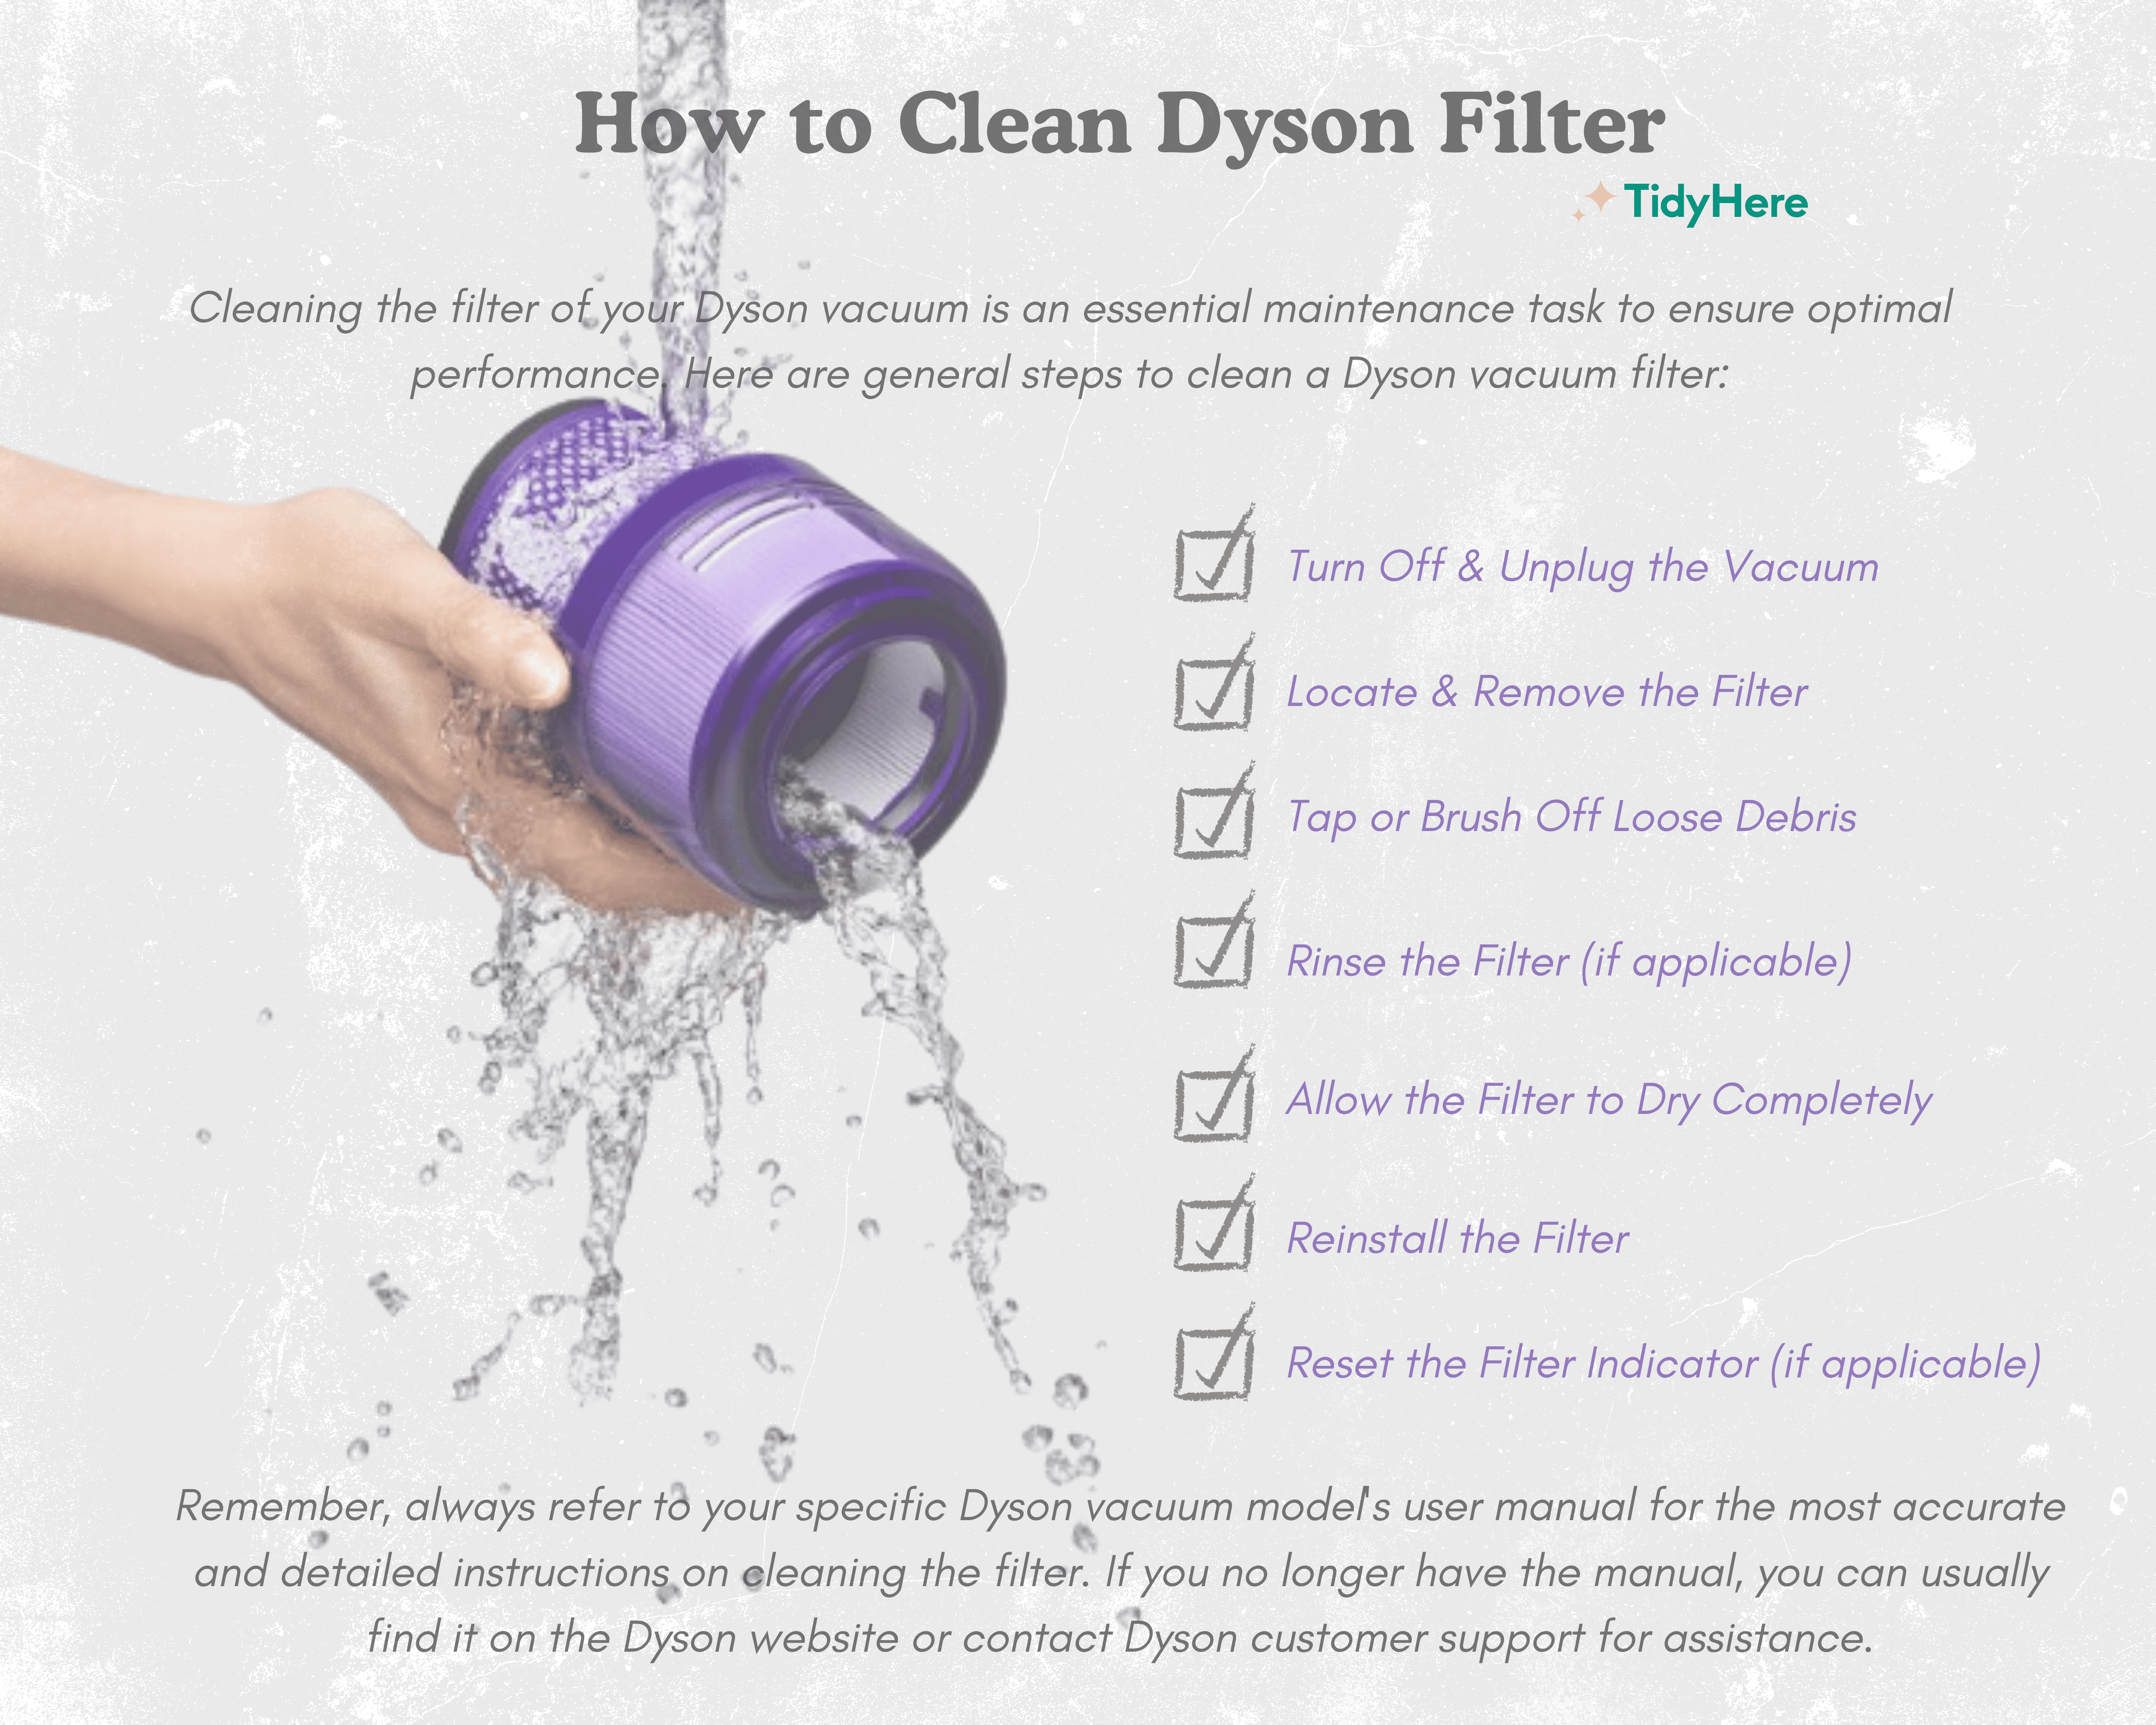 How to Clean Dyson Filter Tidyhere Infographic